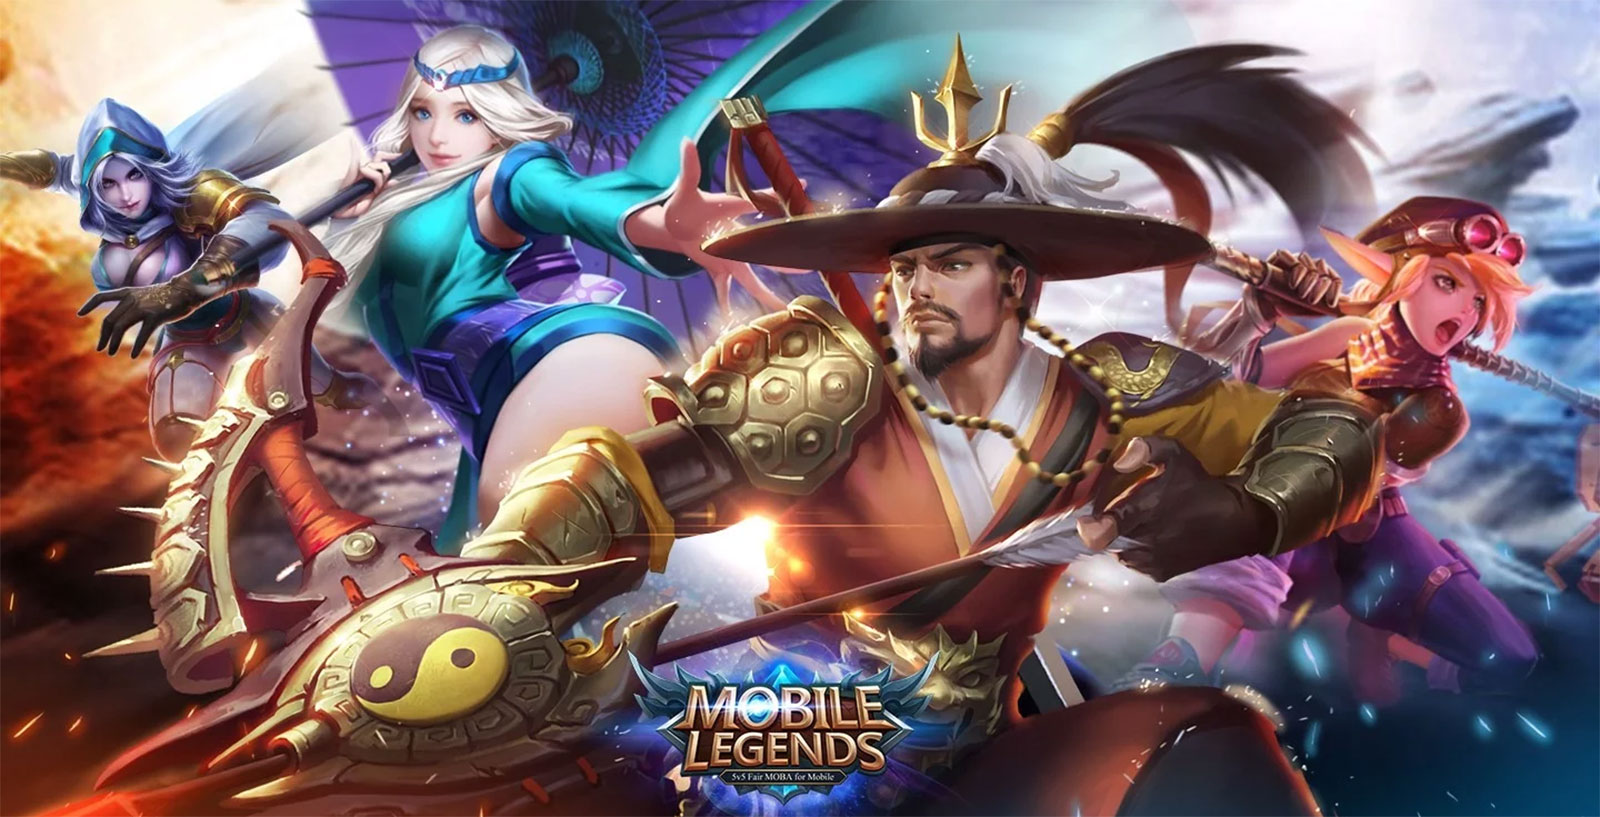  Mobile  Legends  characters UI gameplay first 